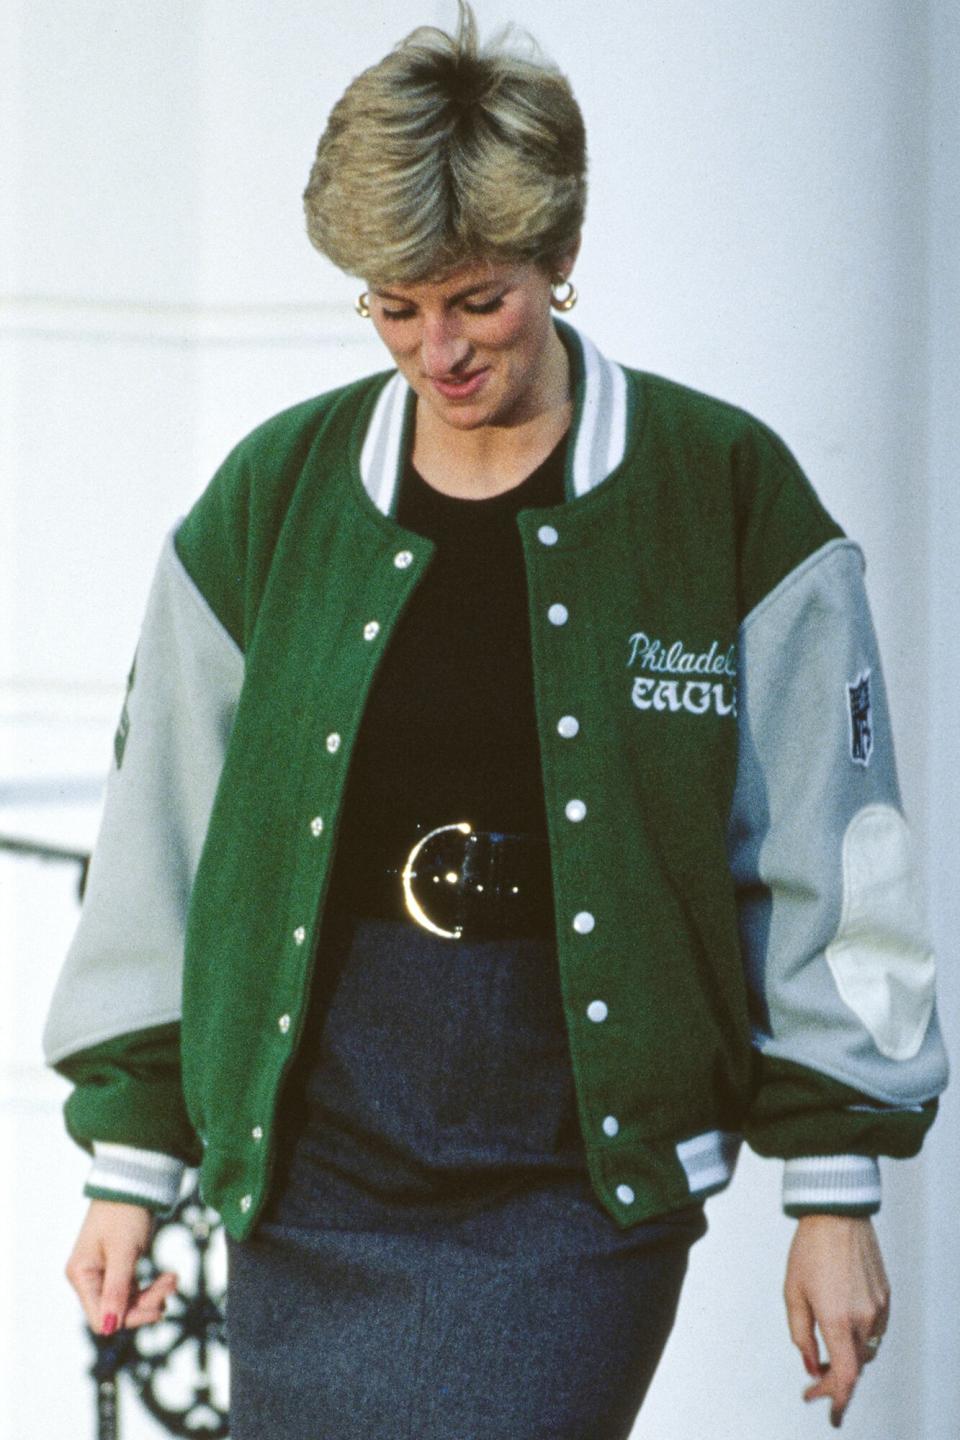 Diana, Princess of Wales (1961 - 1997) wearing a Philadelphia Eagles jacket to drop off her son Prince Harry at Wetherby School in London, January 1991. Prince William (left) is leaving with her, accompanied by a friend.